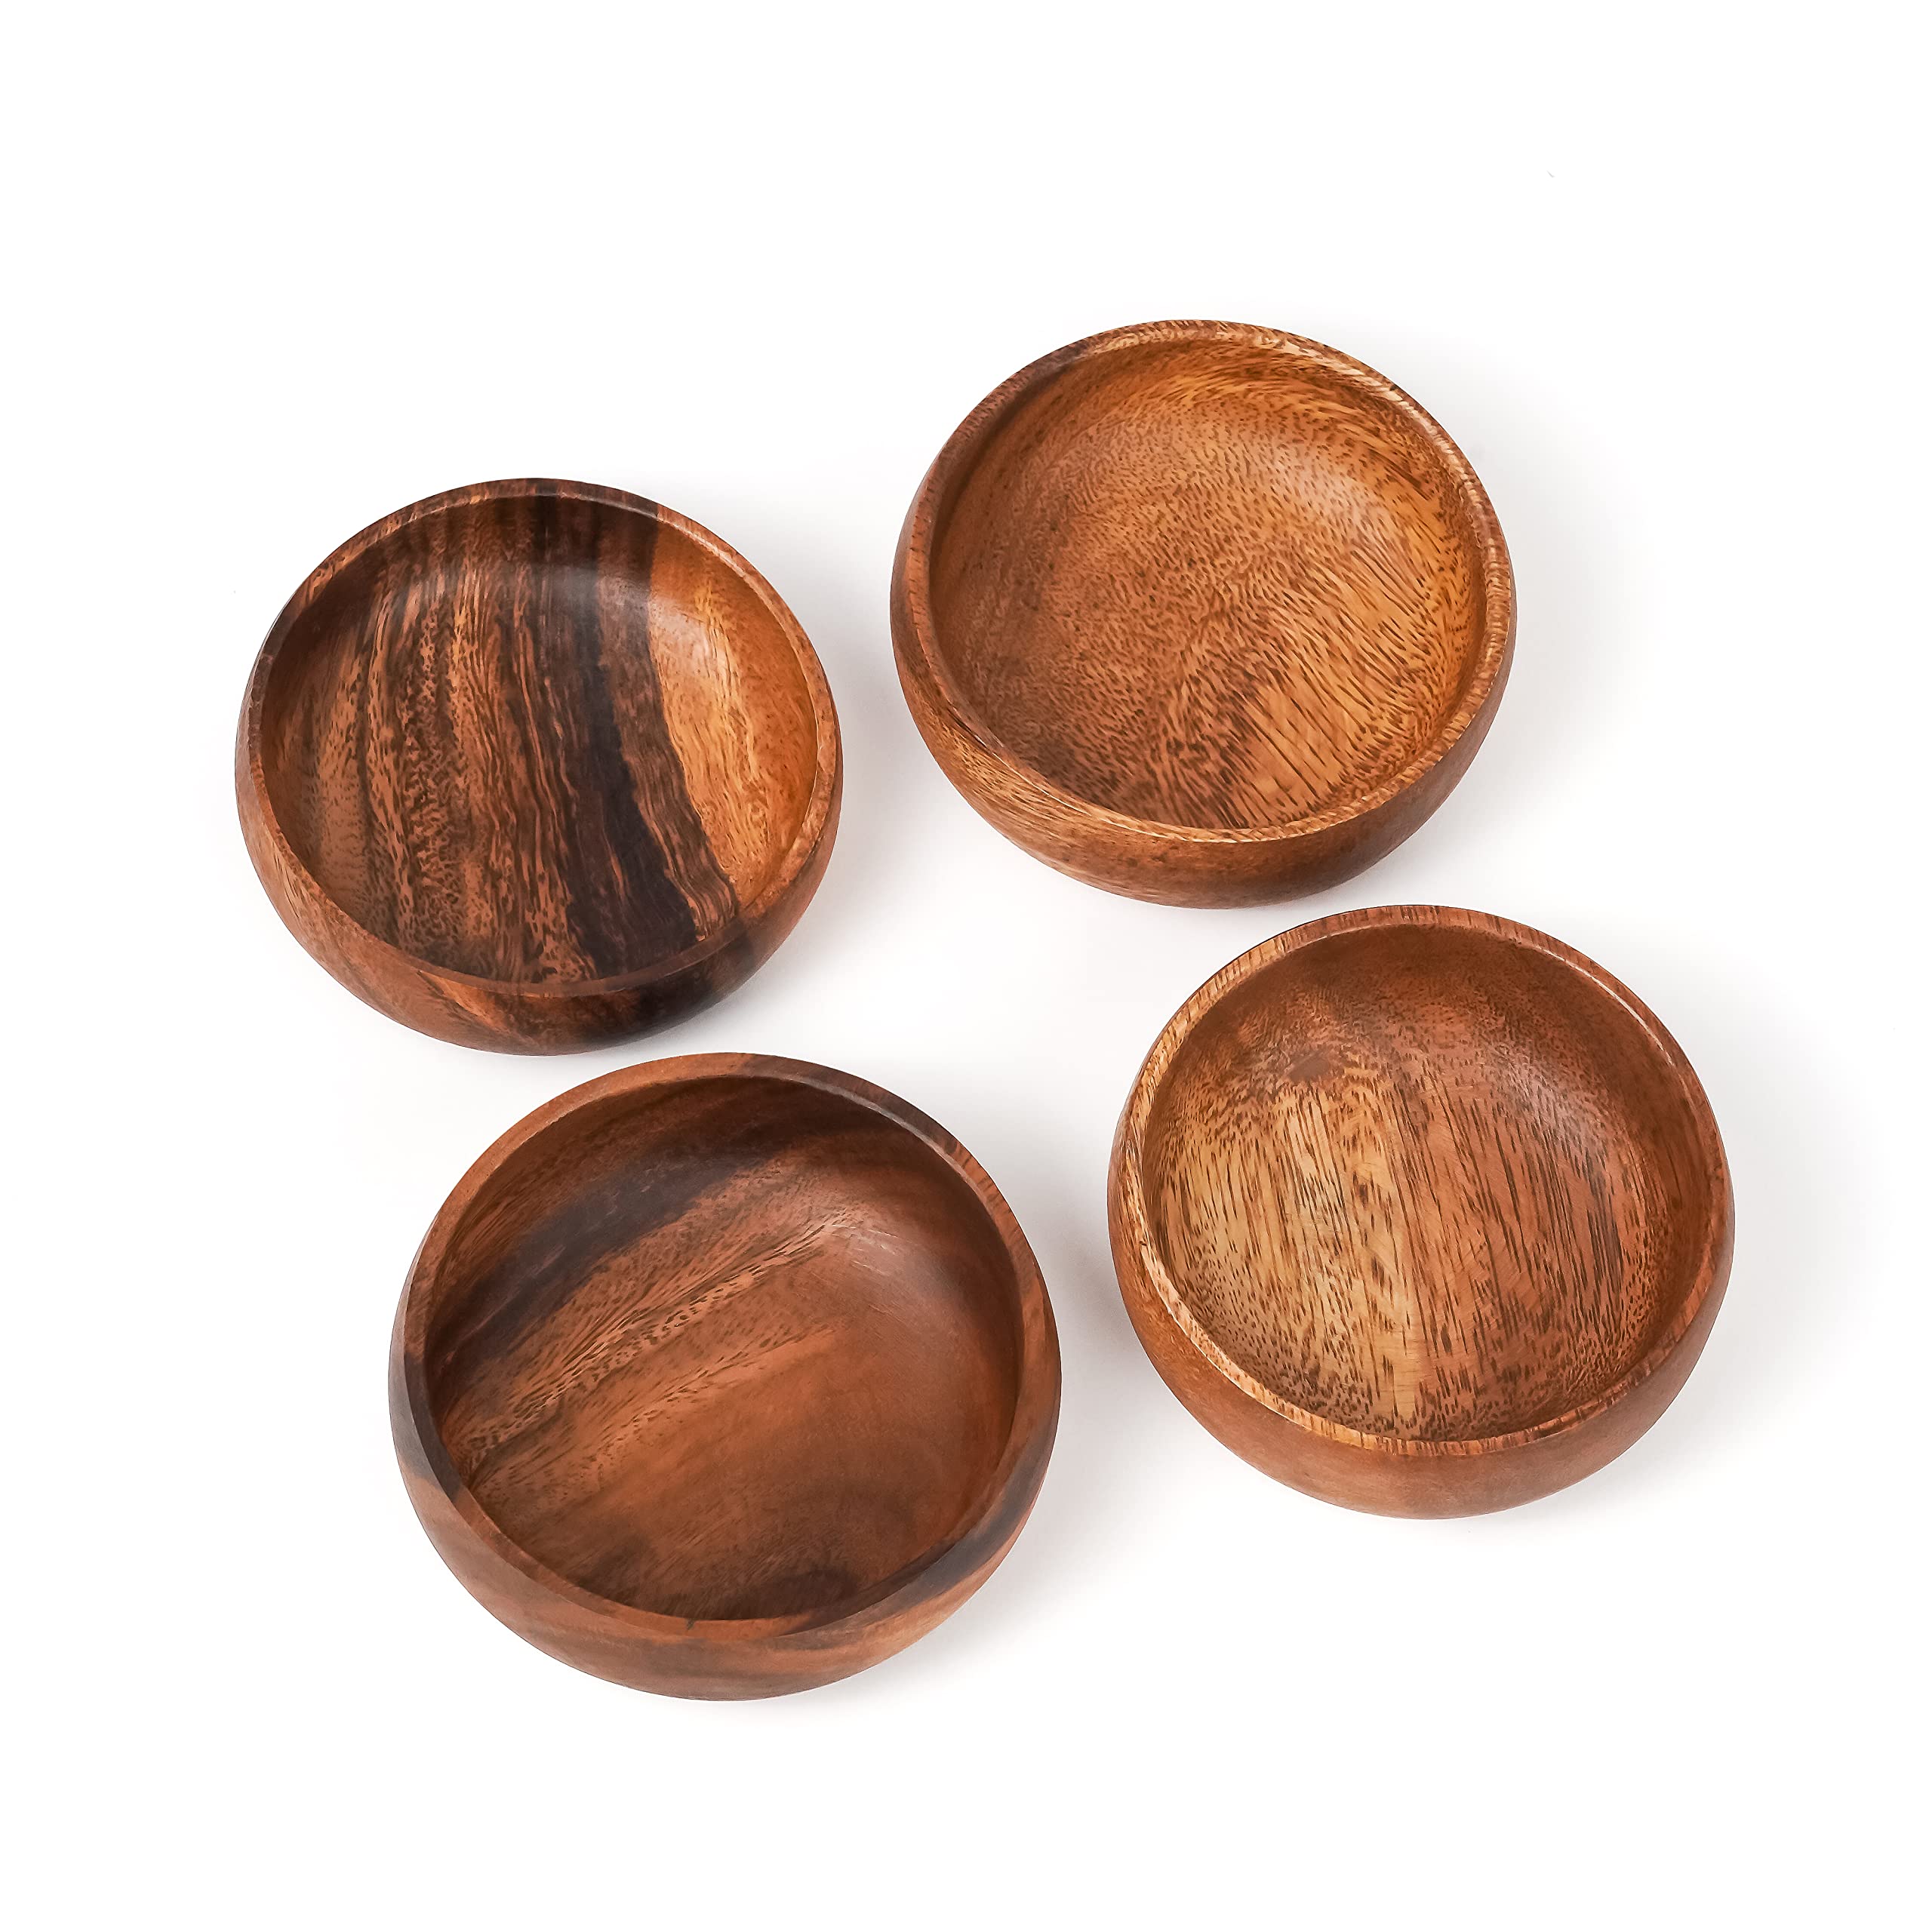 Casa/Legno Authentic Handcrafted Wooden Bowls Set - Exquisite Filipino Craftsmanship for Nuts and Acai Bowls - 4